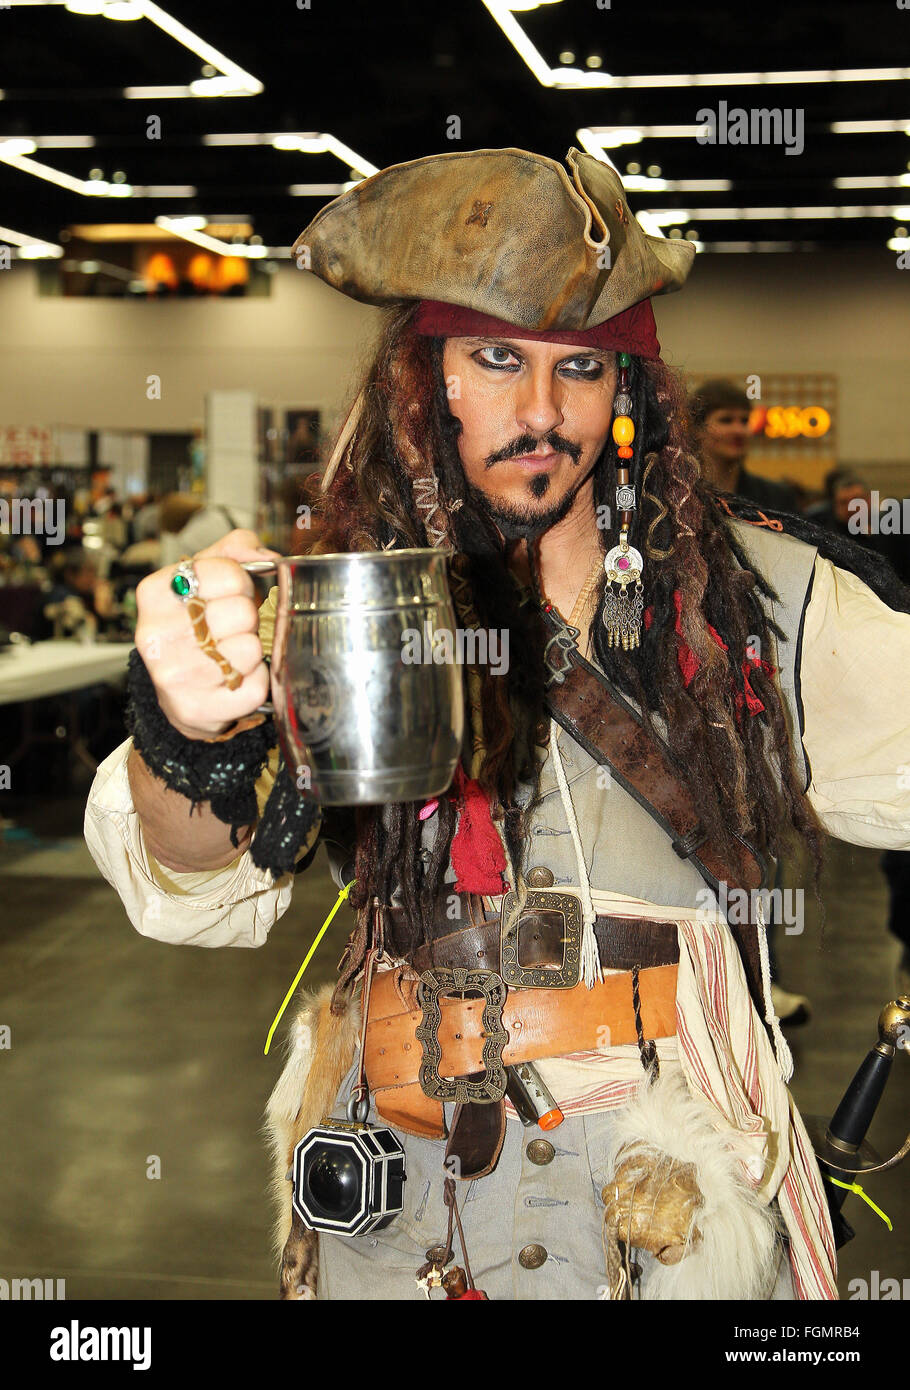 February 20, 2016: A very realistic cosplay enthusiast portrays Captain Jack Sparrow during the 2016 Wizard World Comic Con at the Oregon Convention Center, Portland, OR Larry C. Lawson/CSM. Stock Photo